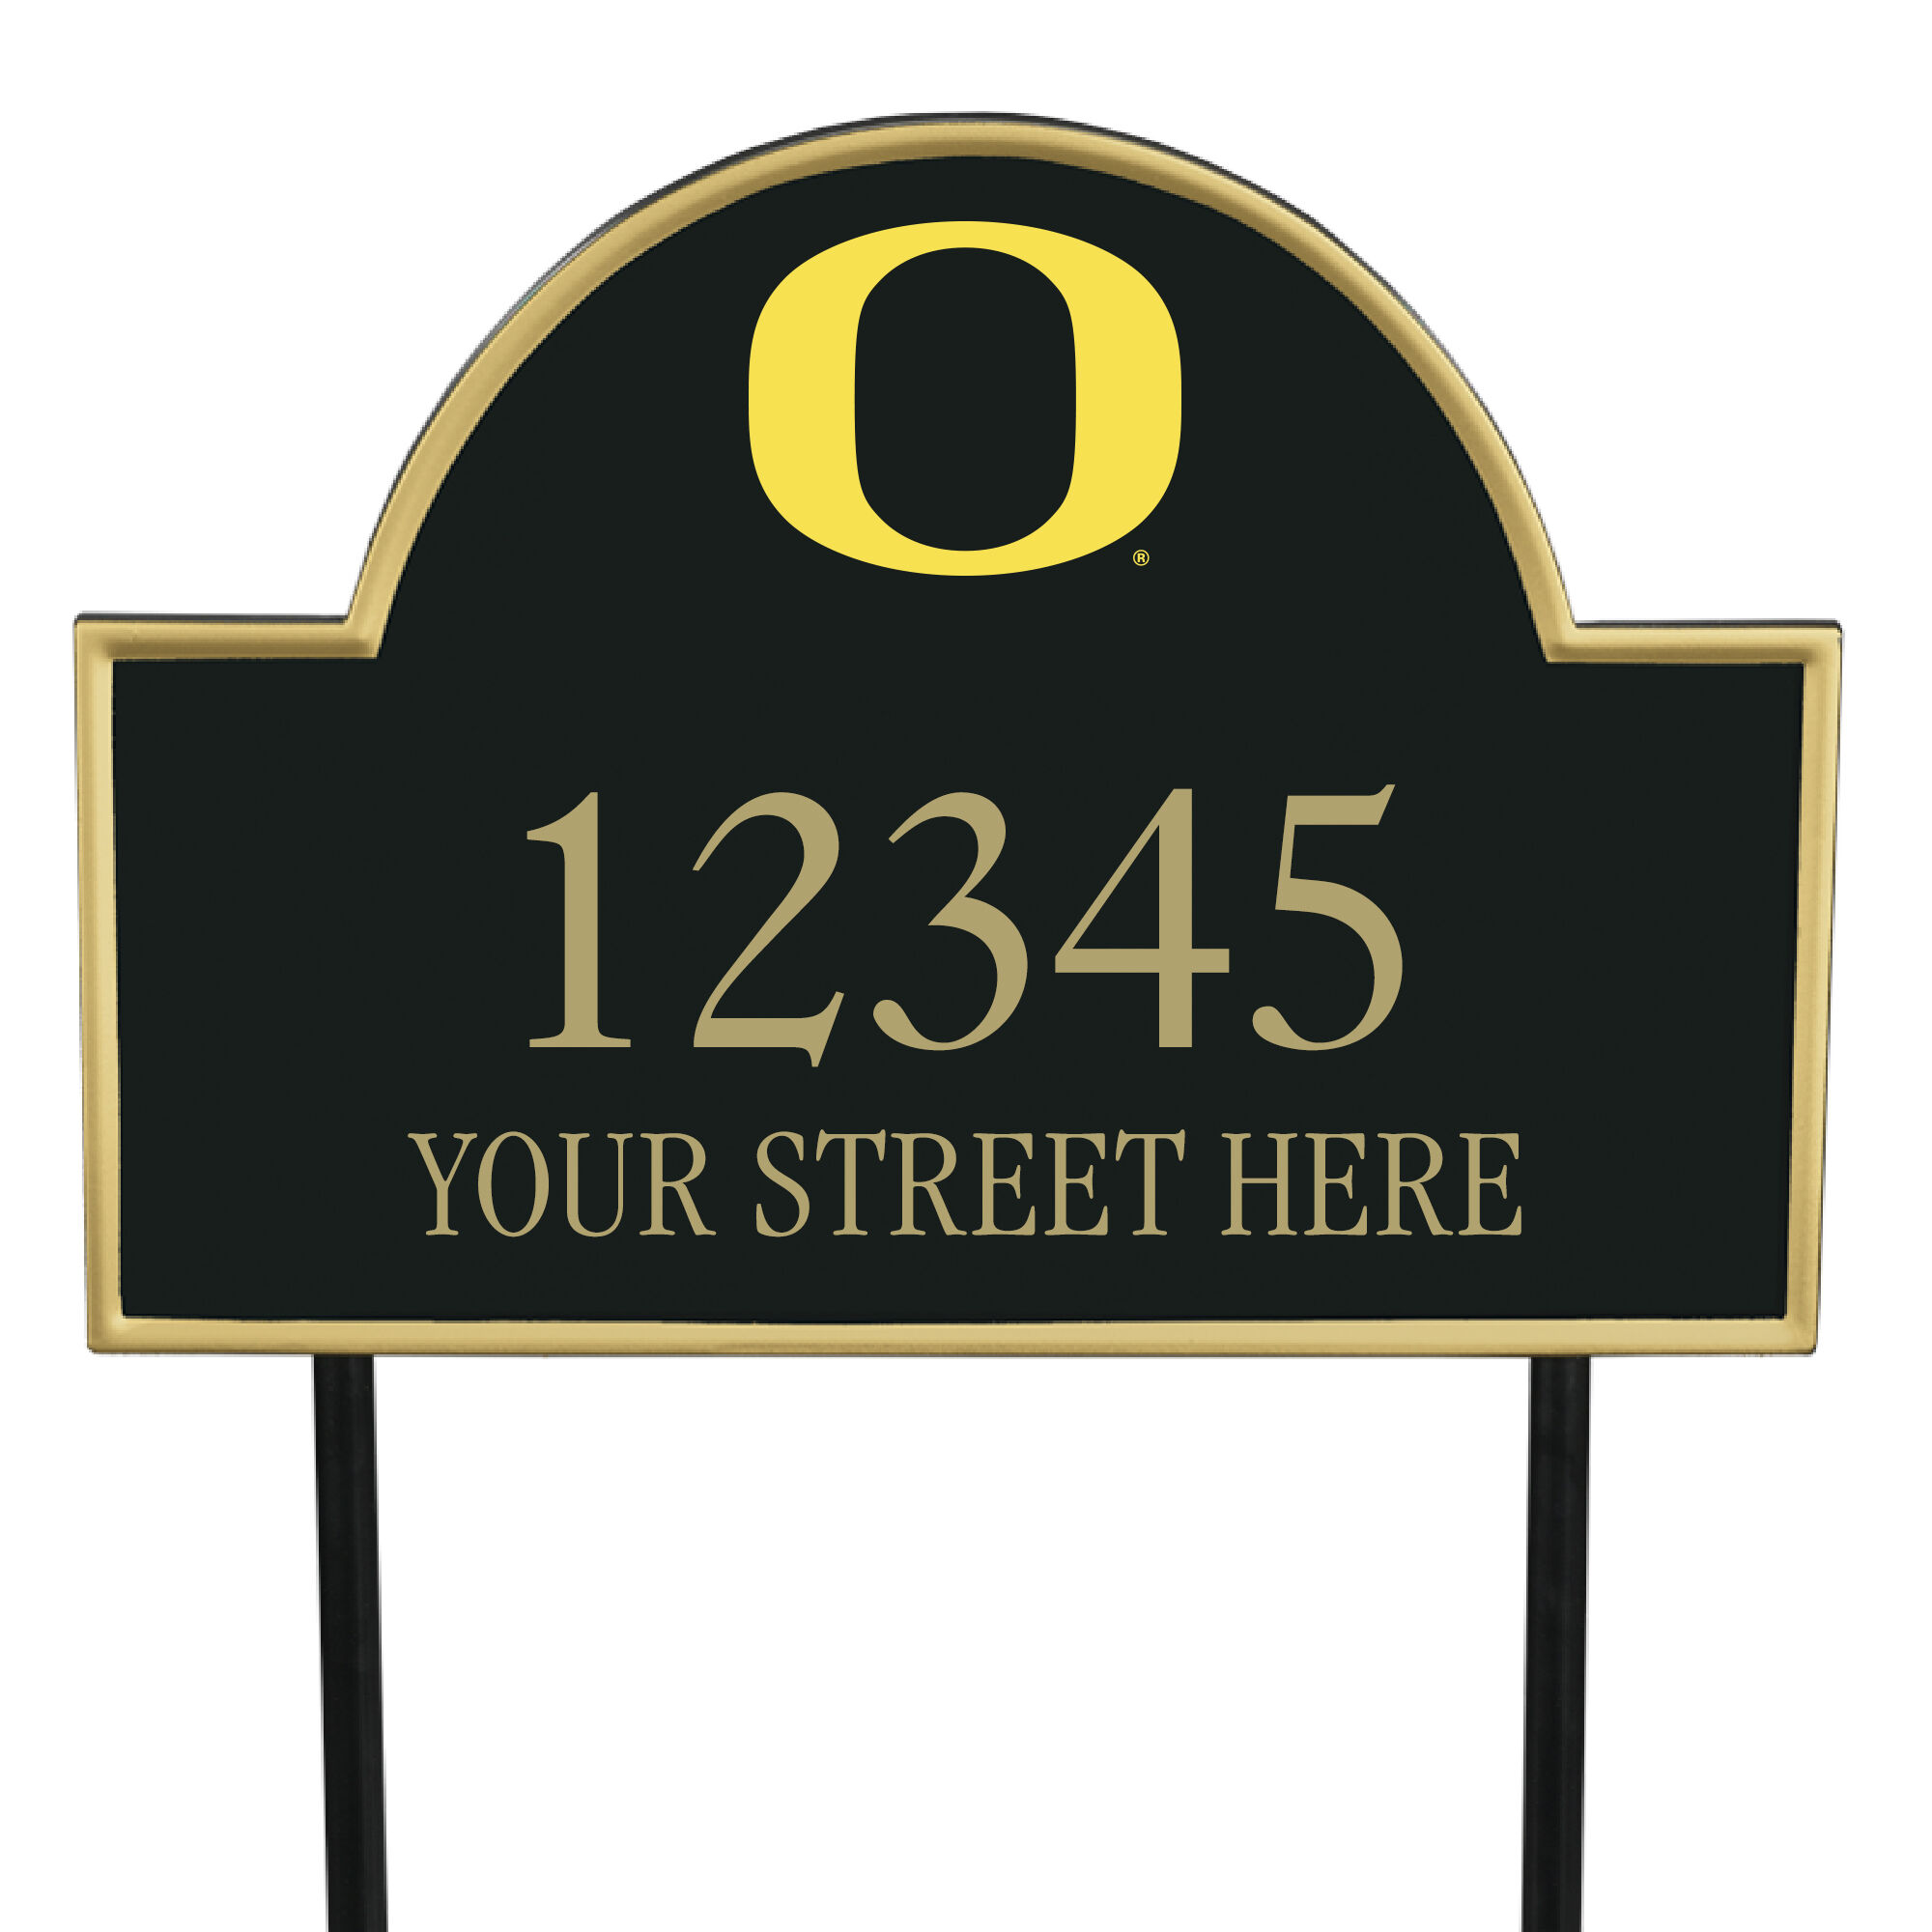 The College Personalized Address Plaque 5716 0384 b Oregon